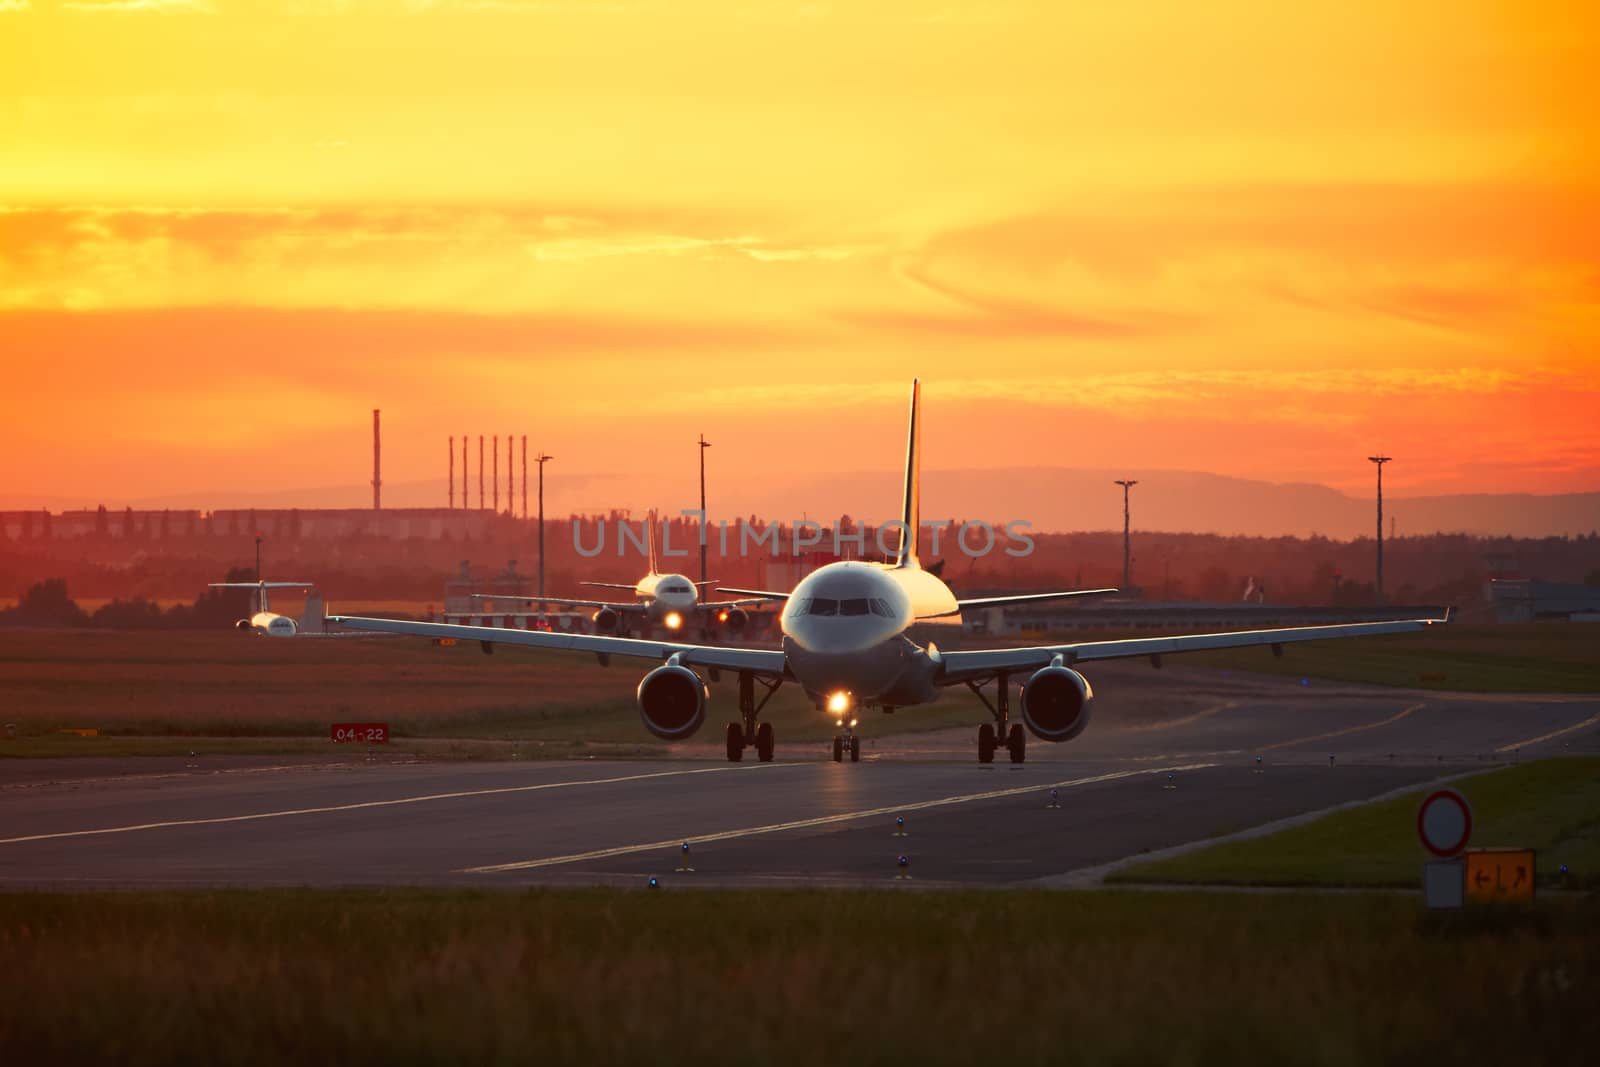 Airport traffic at the golden sunset. Airplanes are taxiing to the runway for take off.